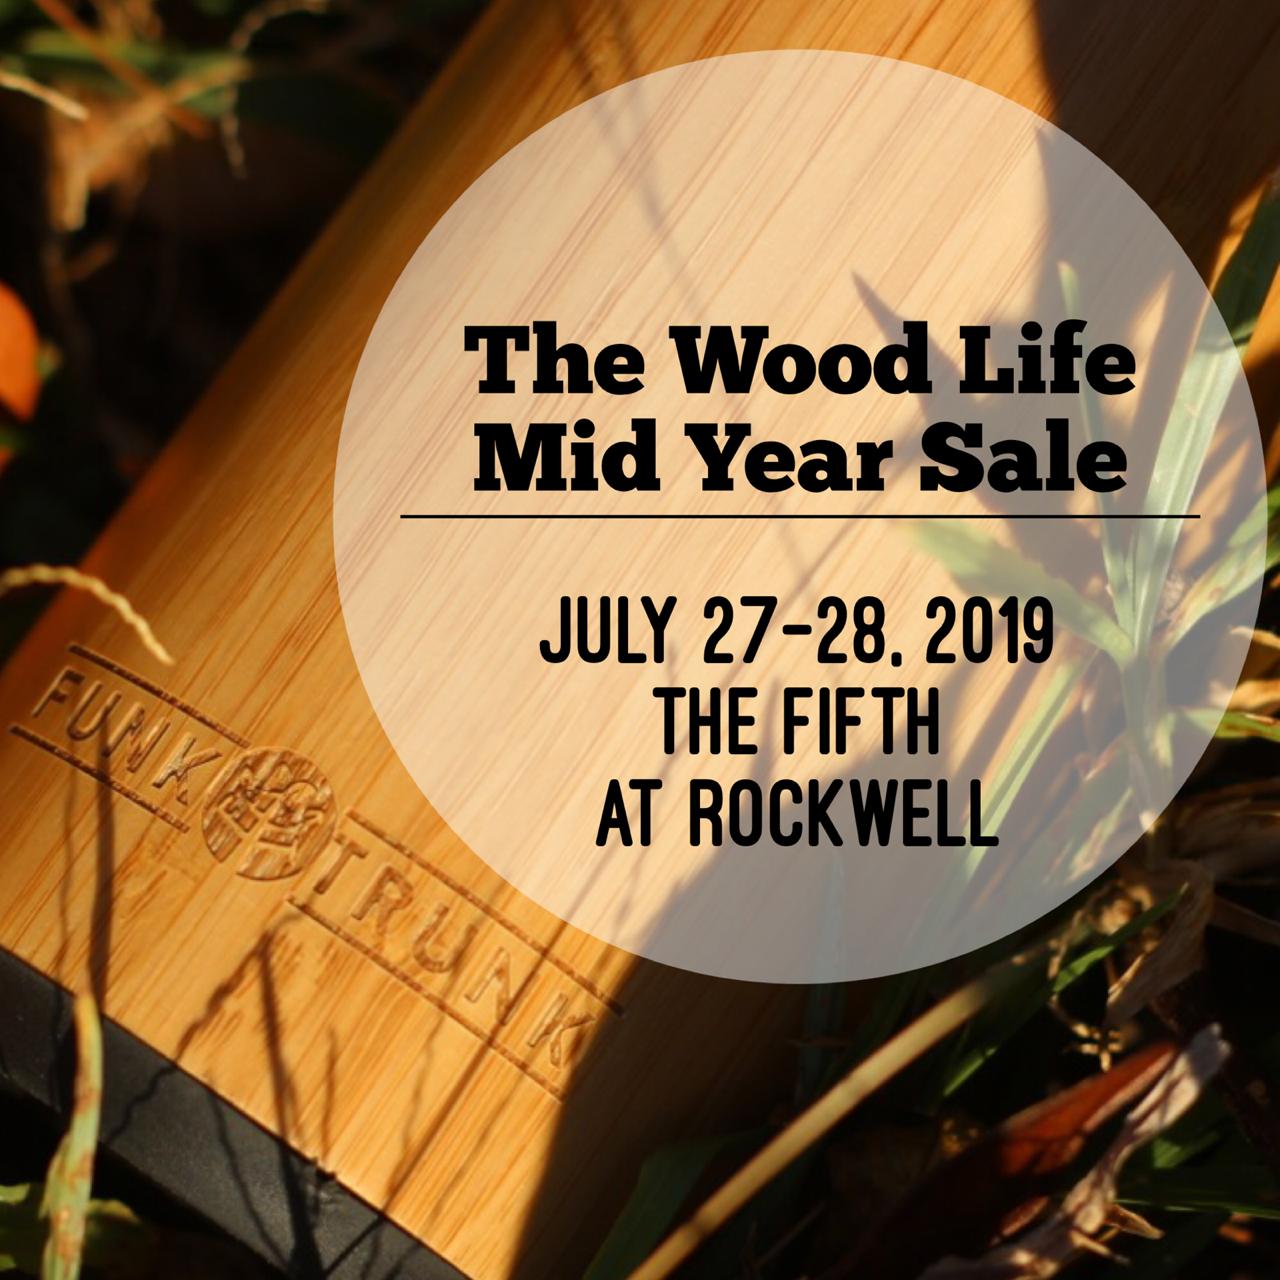 The Wood Life Mid Year Sale!